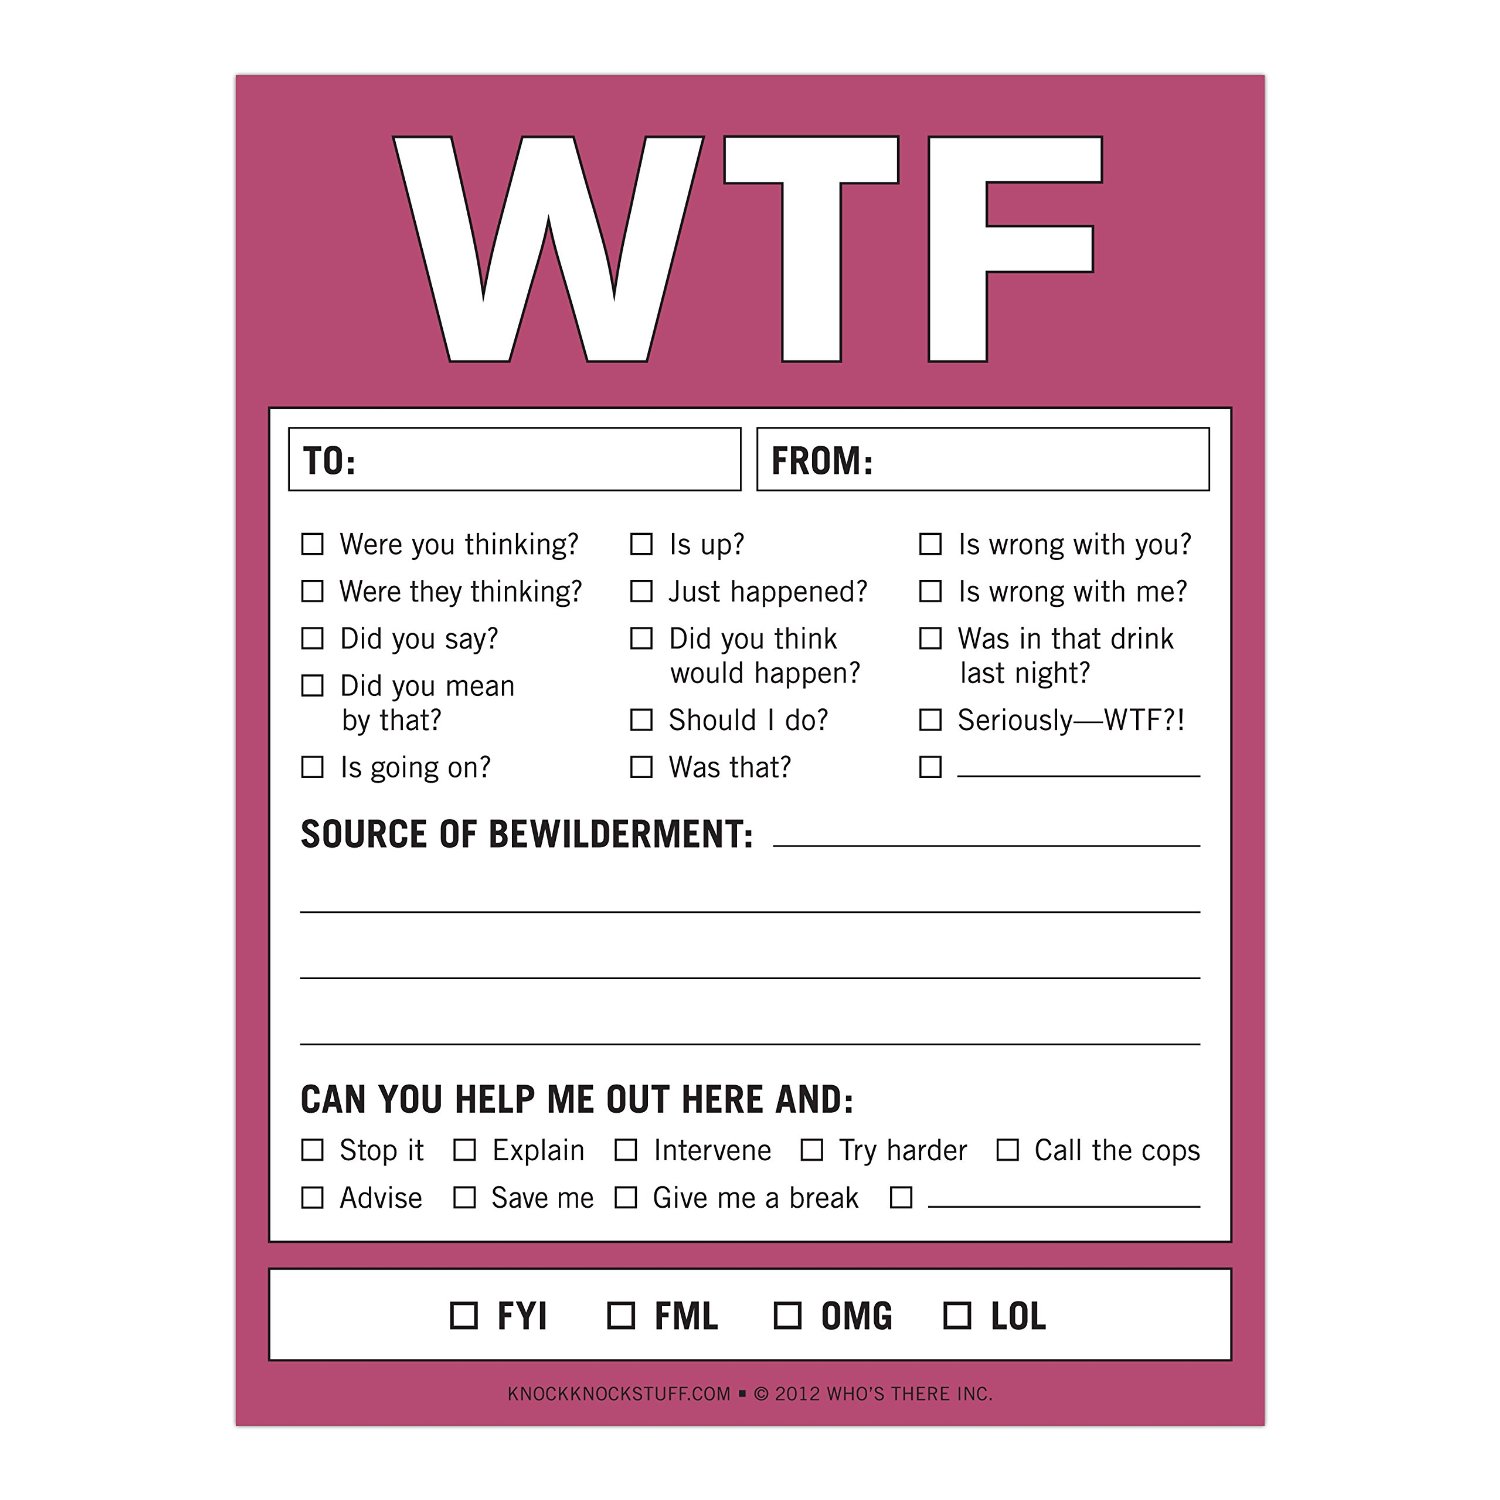 WTF Office notepad